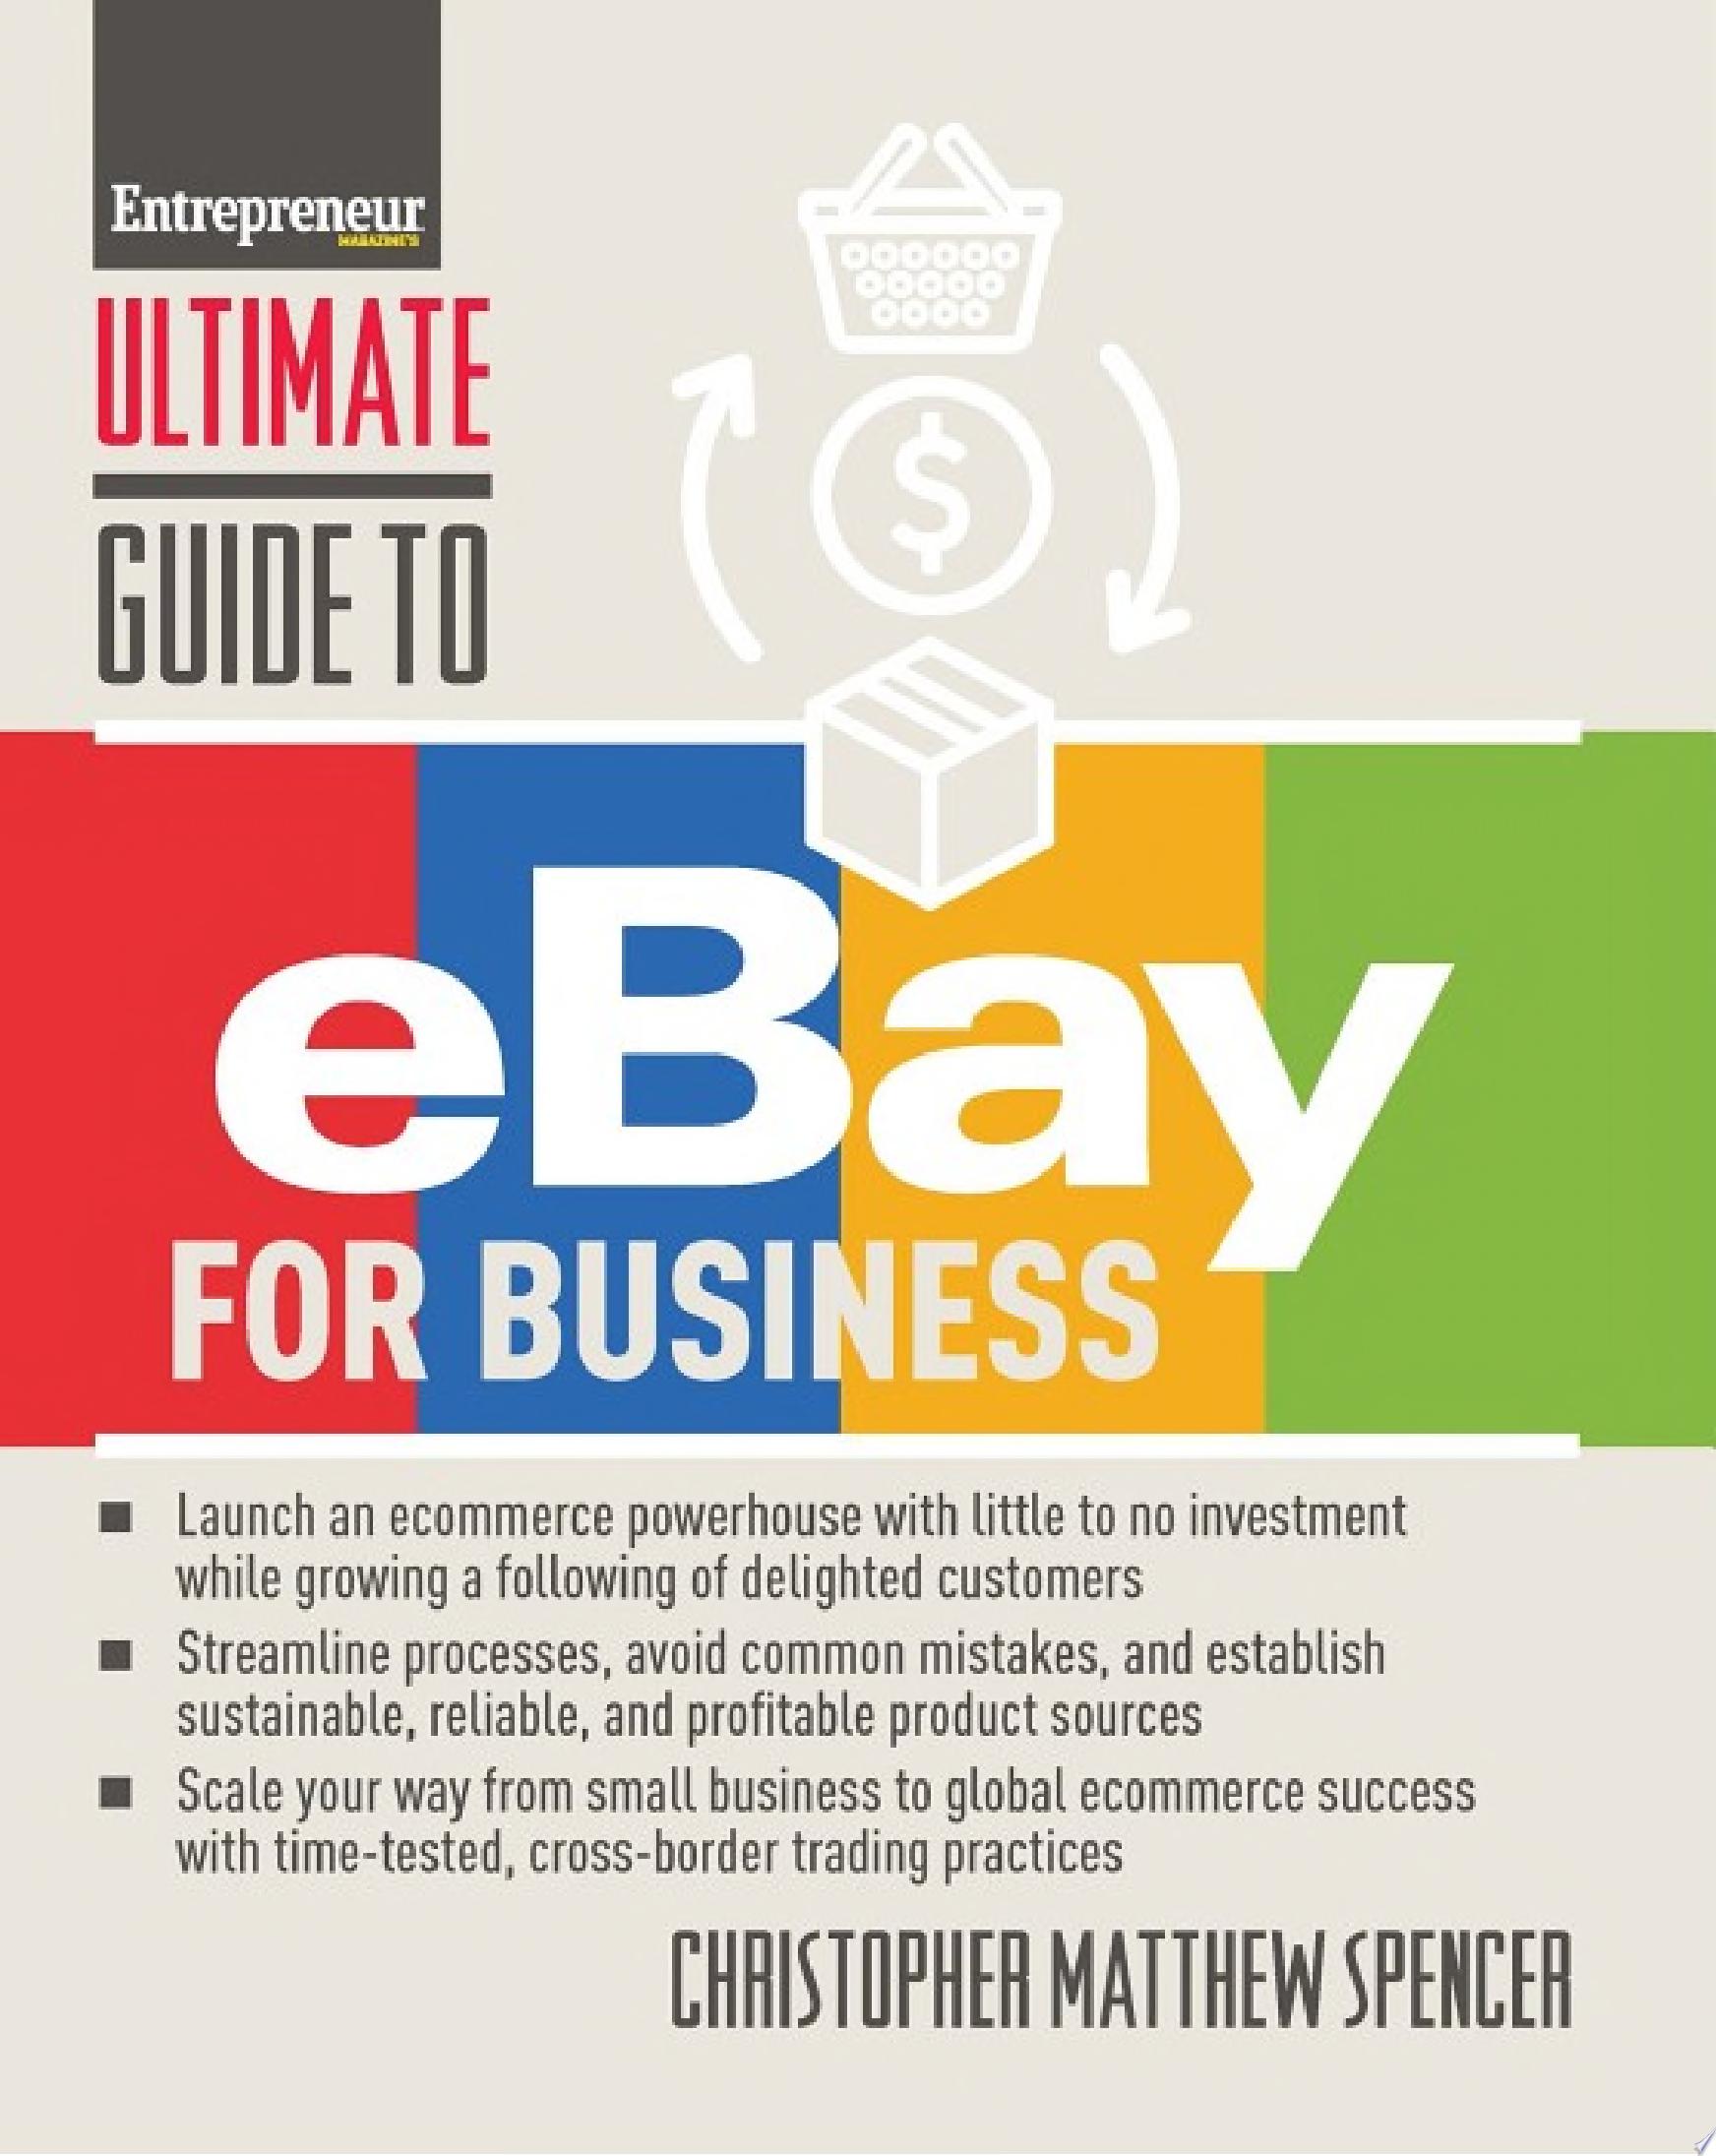 Image for "Ultimate Guide to eBay for Business"